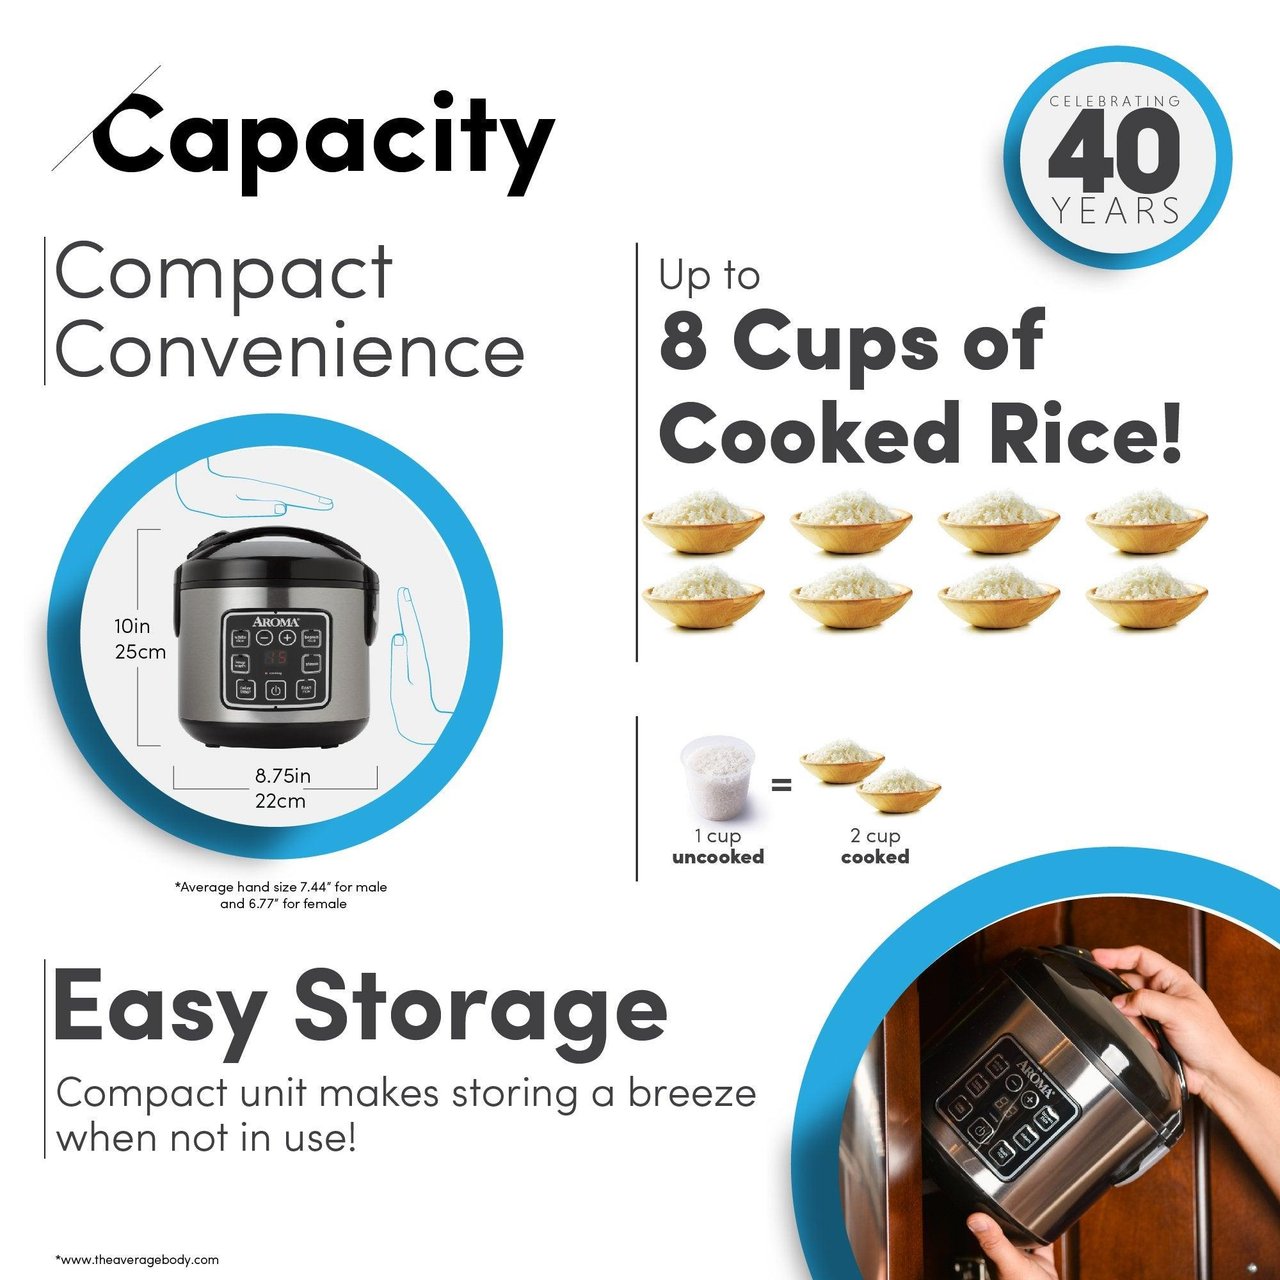 5 AROMA Digital Rice Cooker, 4-Cup (Uncooked) / 8-Cup (Cooked), Steamer, Grain Cooker, Multicooker, 2 Qt, Stainless Steel Exterior, ARC-914SBD